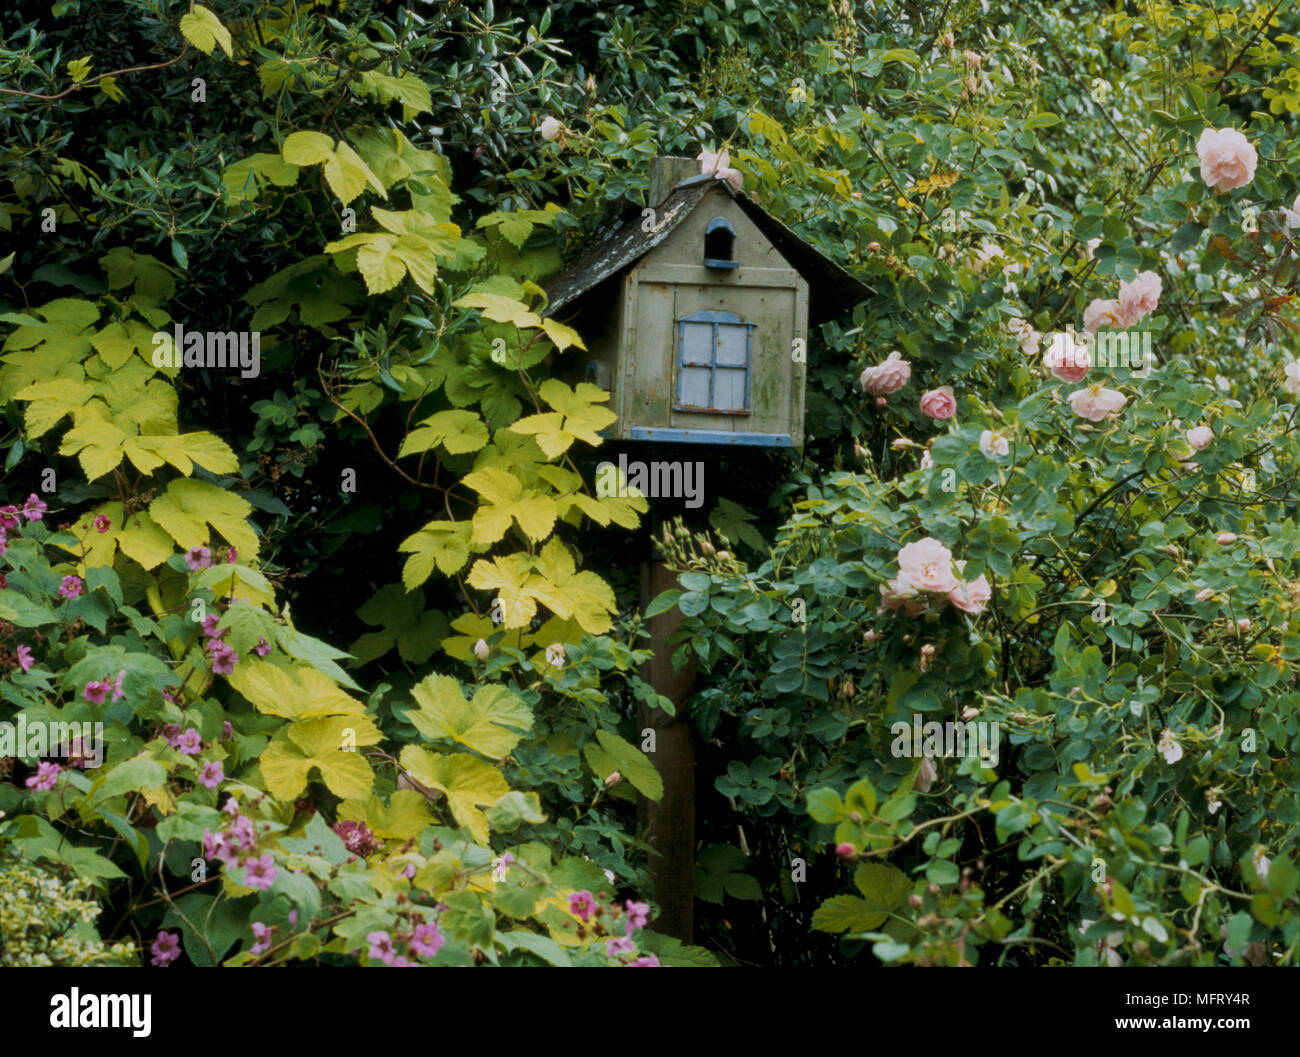 A detail of a garden showing a wooden bird box set amongst climbing roses and shrub foliage Stock Photo